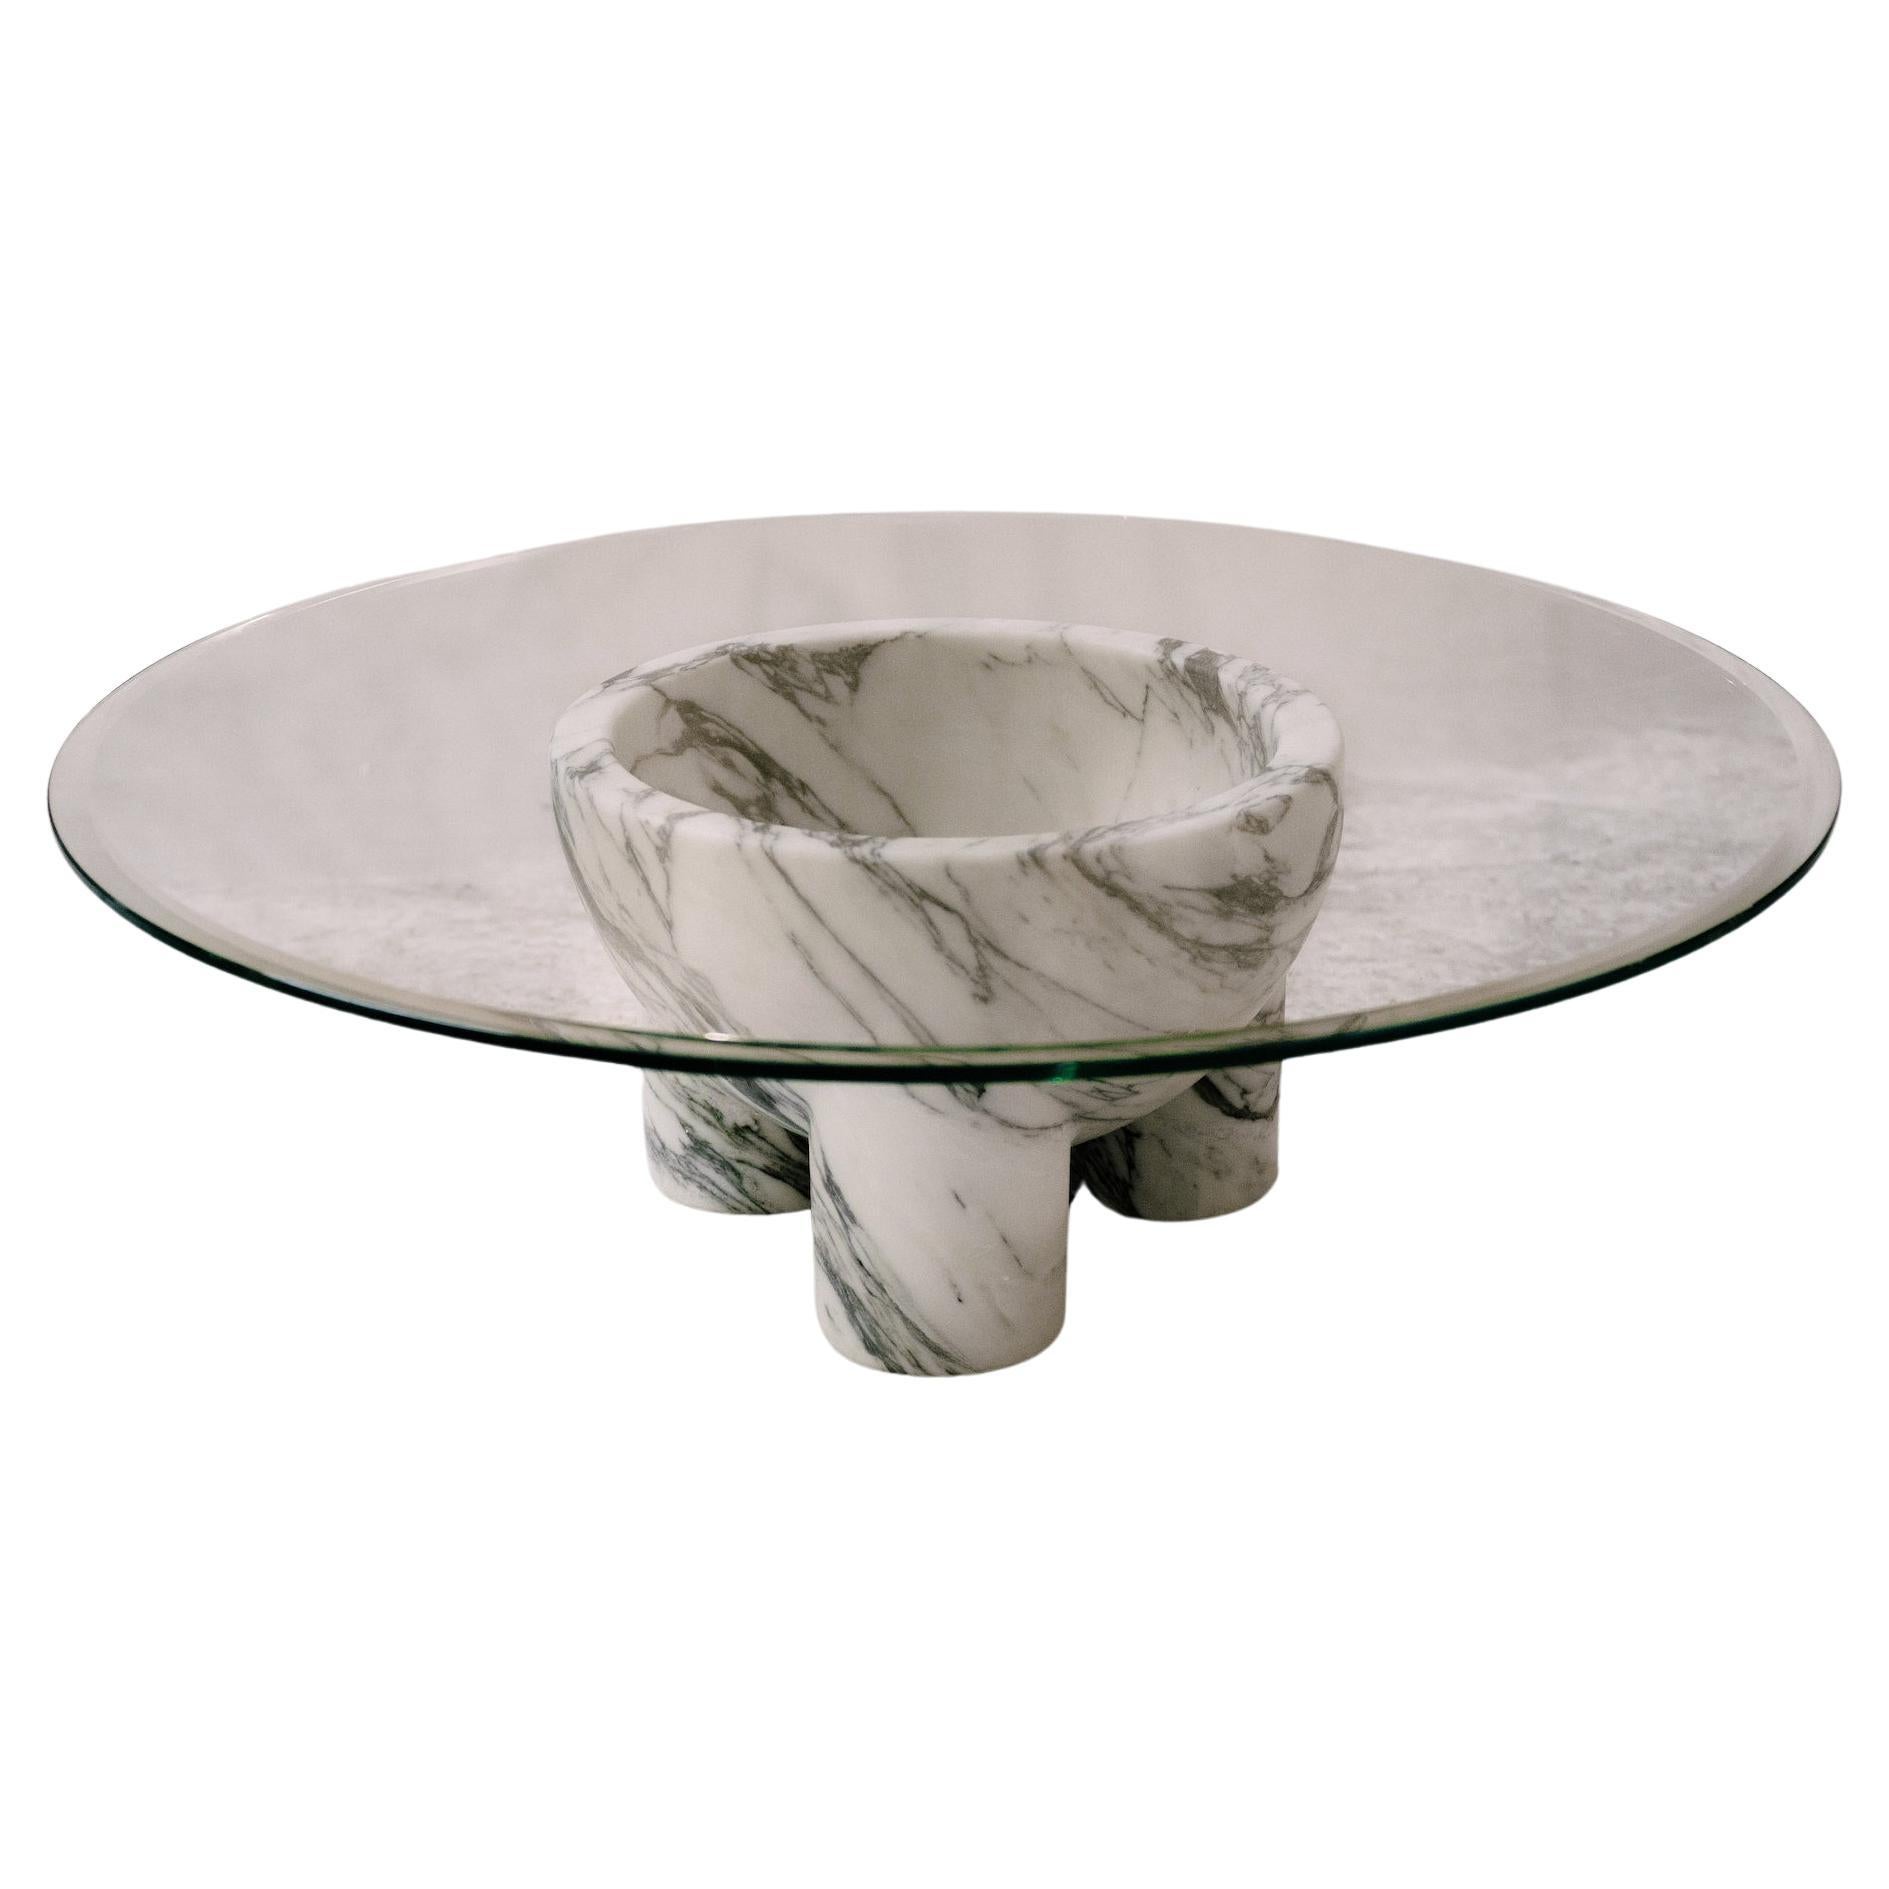 Inspired by coffee traditions and ritual, tAAABle balances form and material to achieve a harmonious, low-profile design rich in character. The table base is available in multiple marbles and can be reversed for two unique table